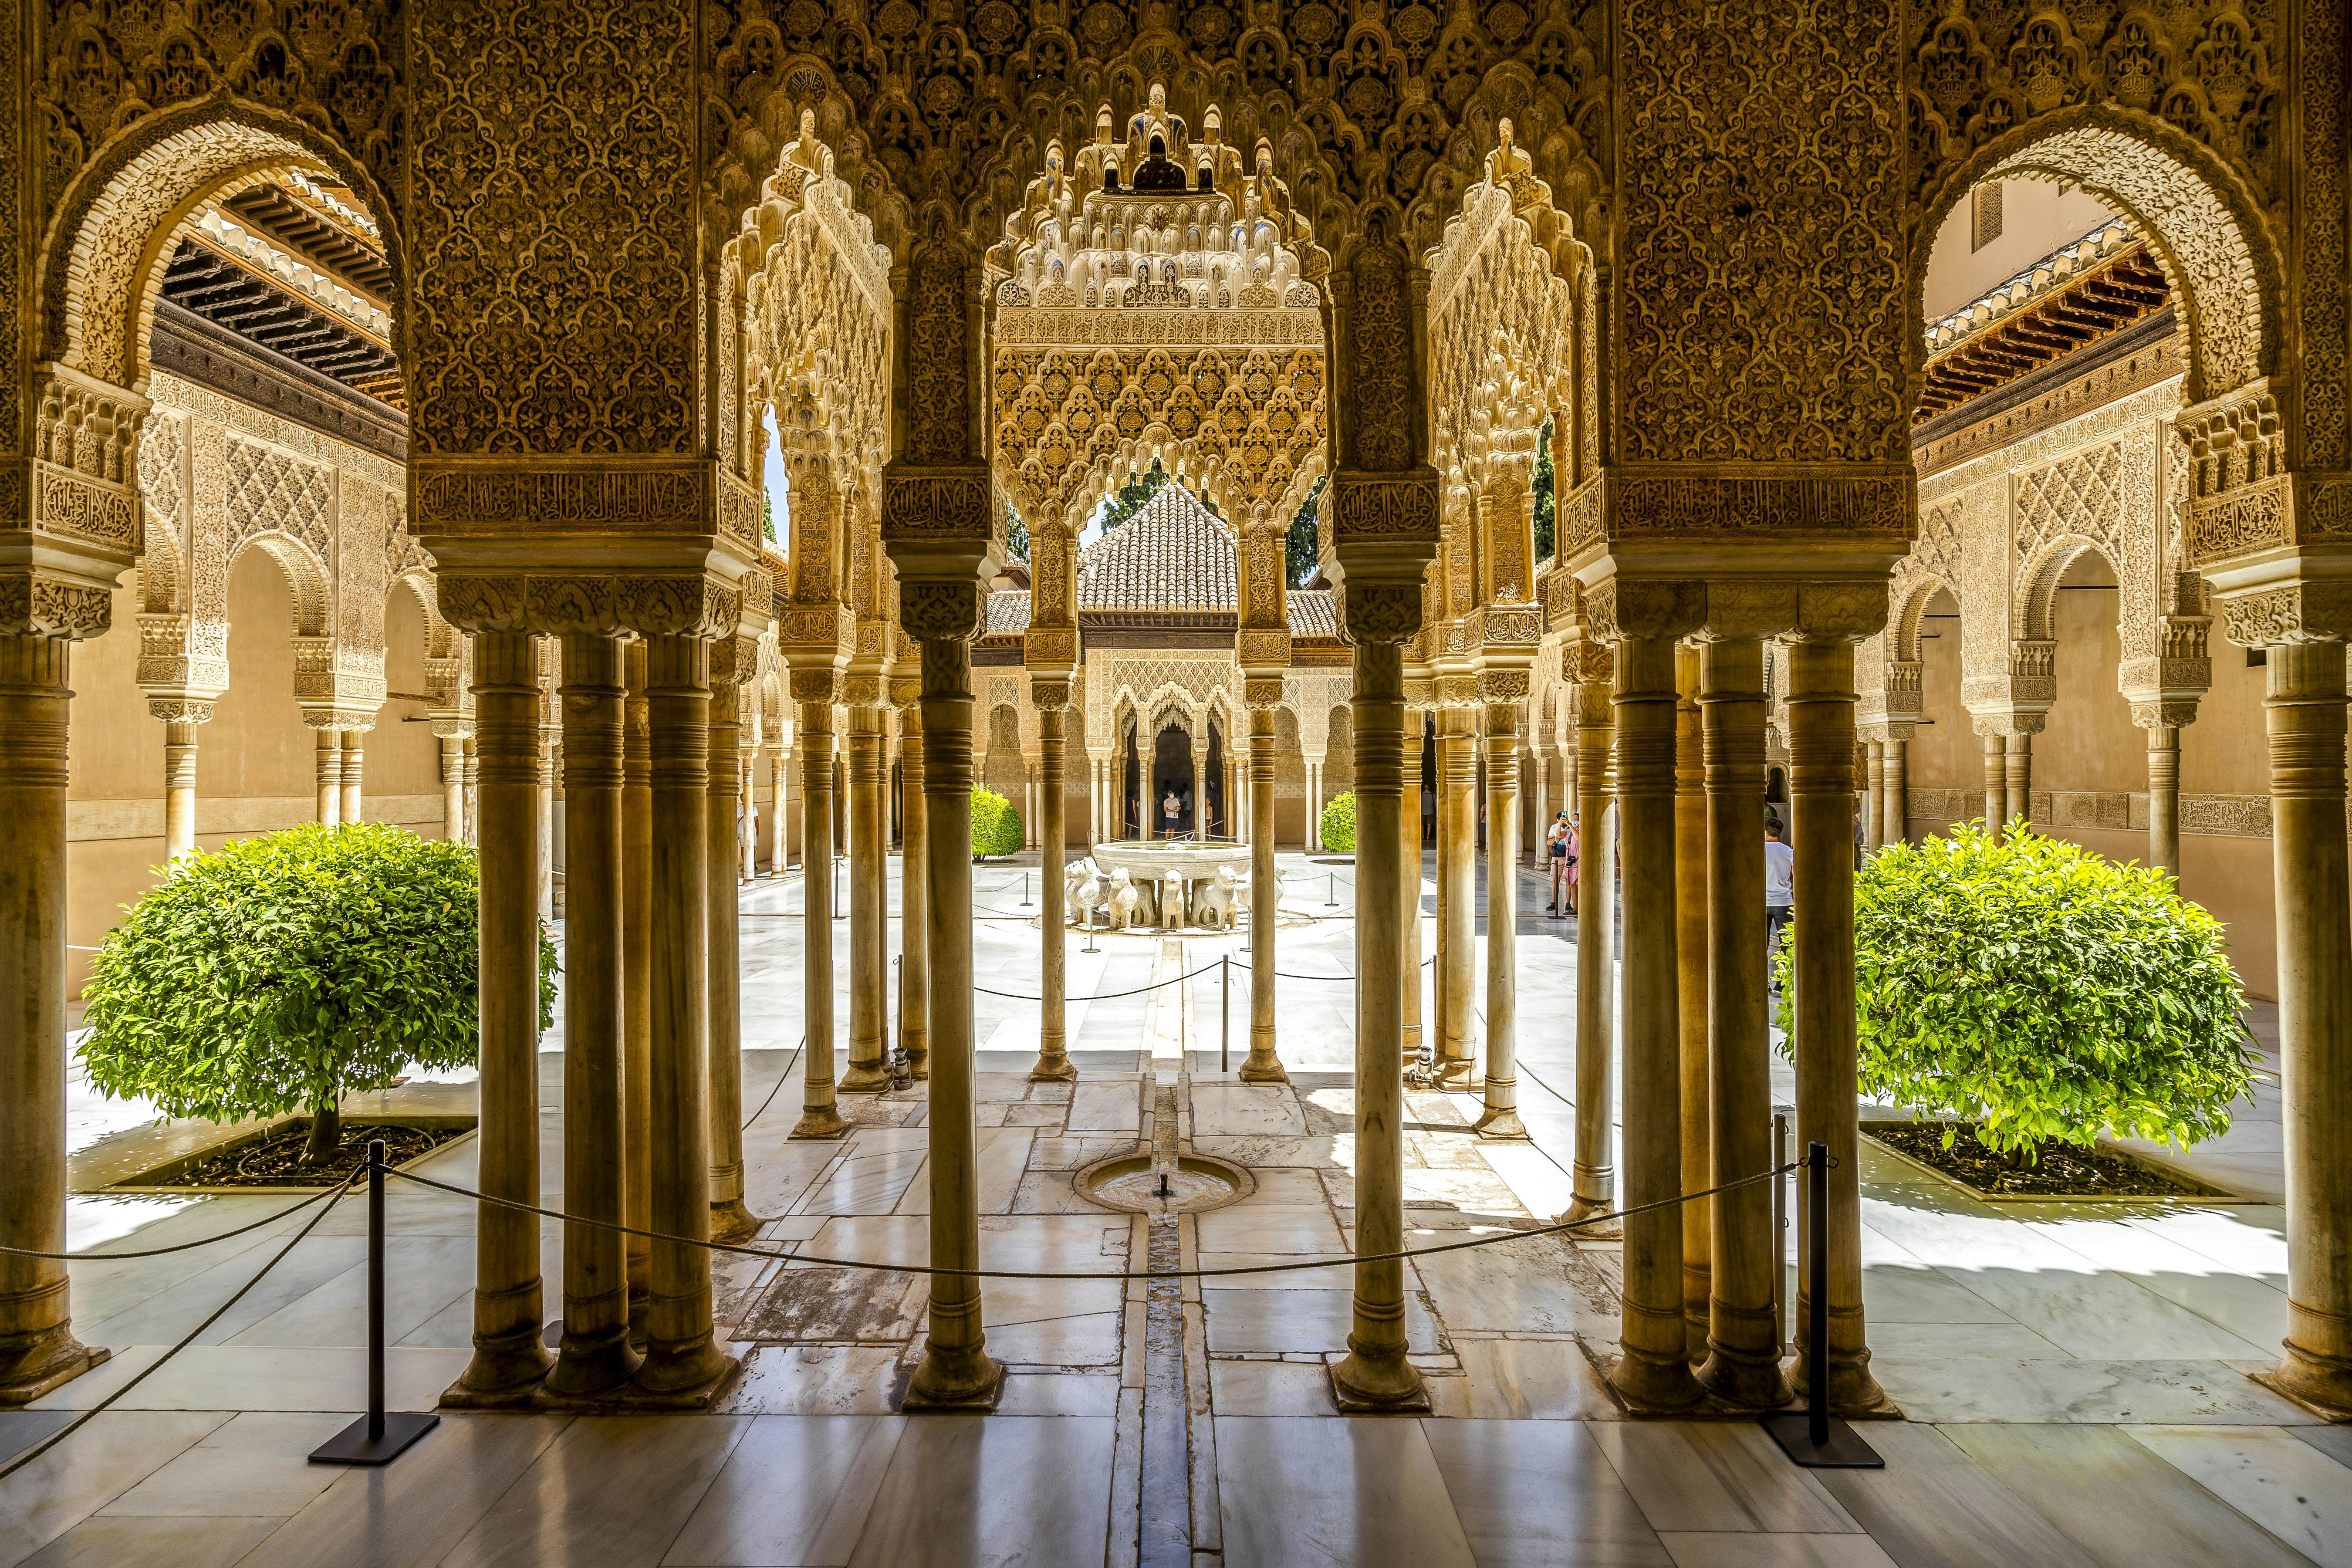 Alhambra | Granada, Andalucía | Attractions - Lonely Planet